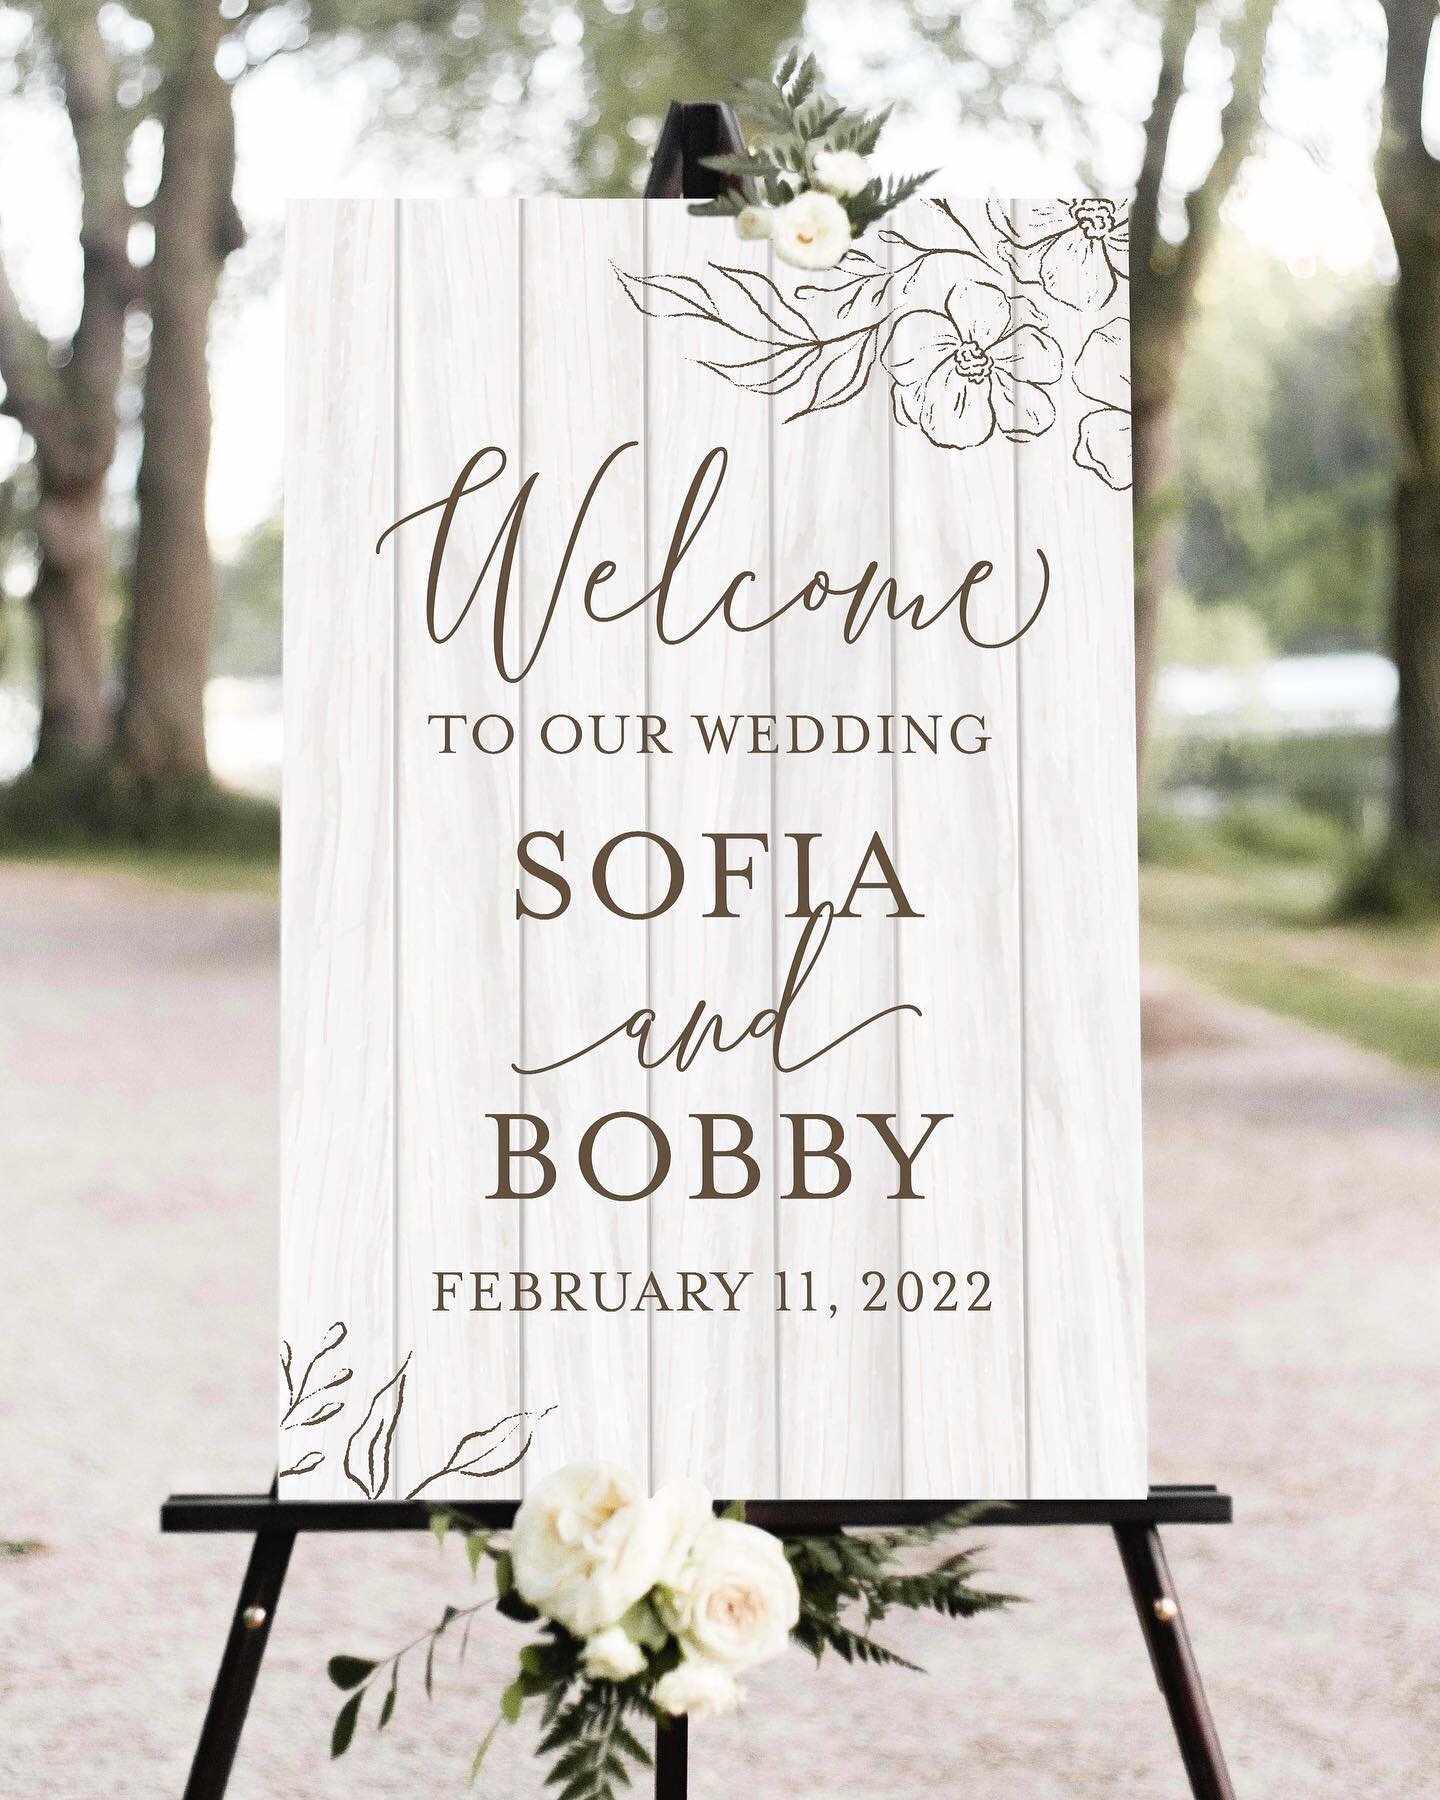 Happy wedding day, Sophia and Bobby! I loved creating your rustic wedding signage and day of stationery.

#letterpress #letterpressinvitations #letterpressstudio #letterpressprinting
#letterpressstationery #weddingstationery #weddinginvitations #even